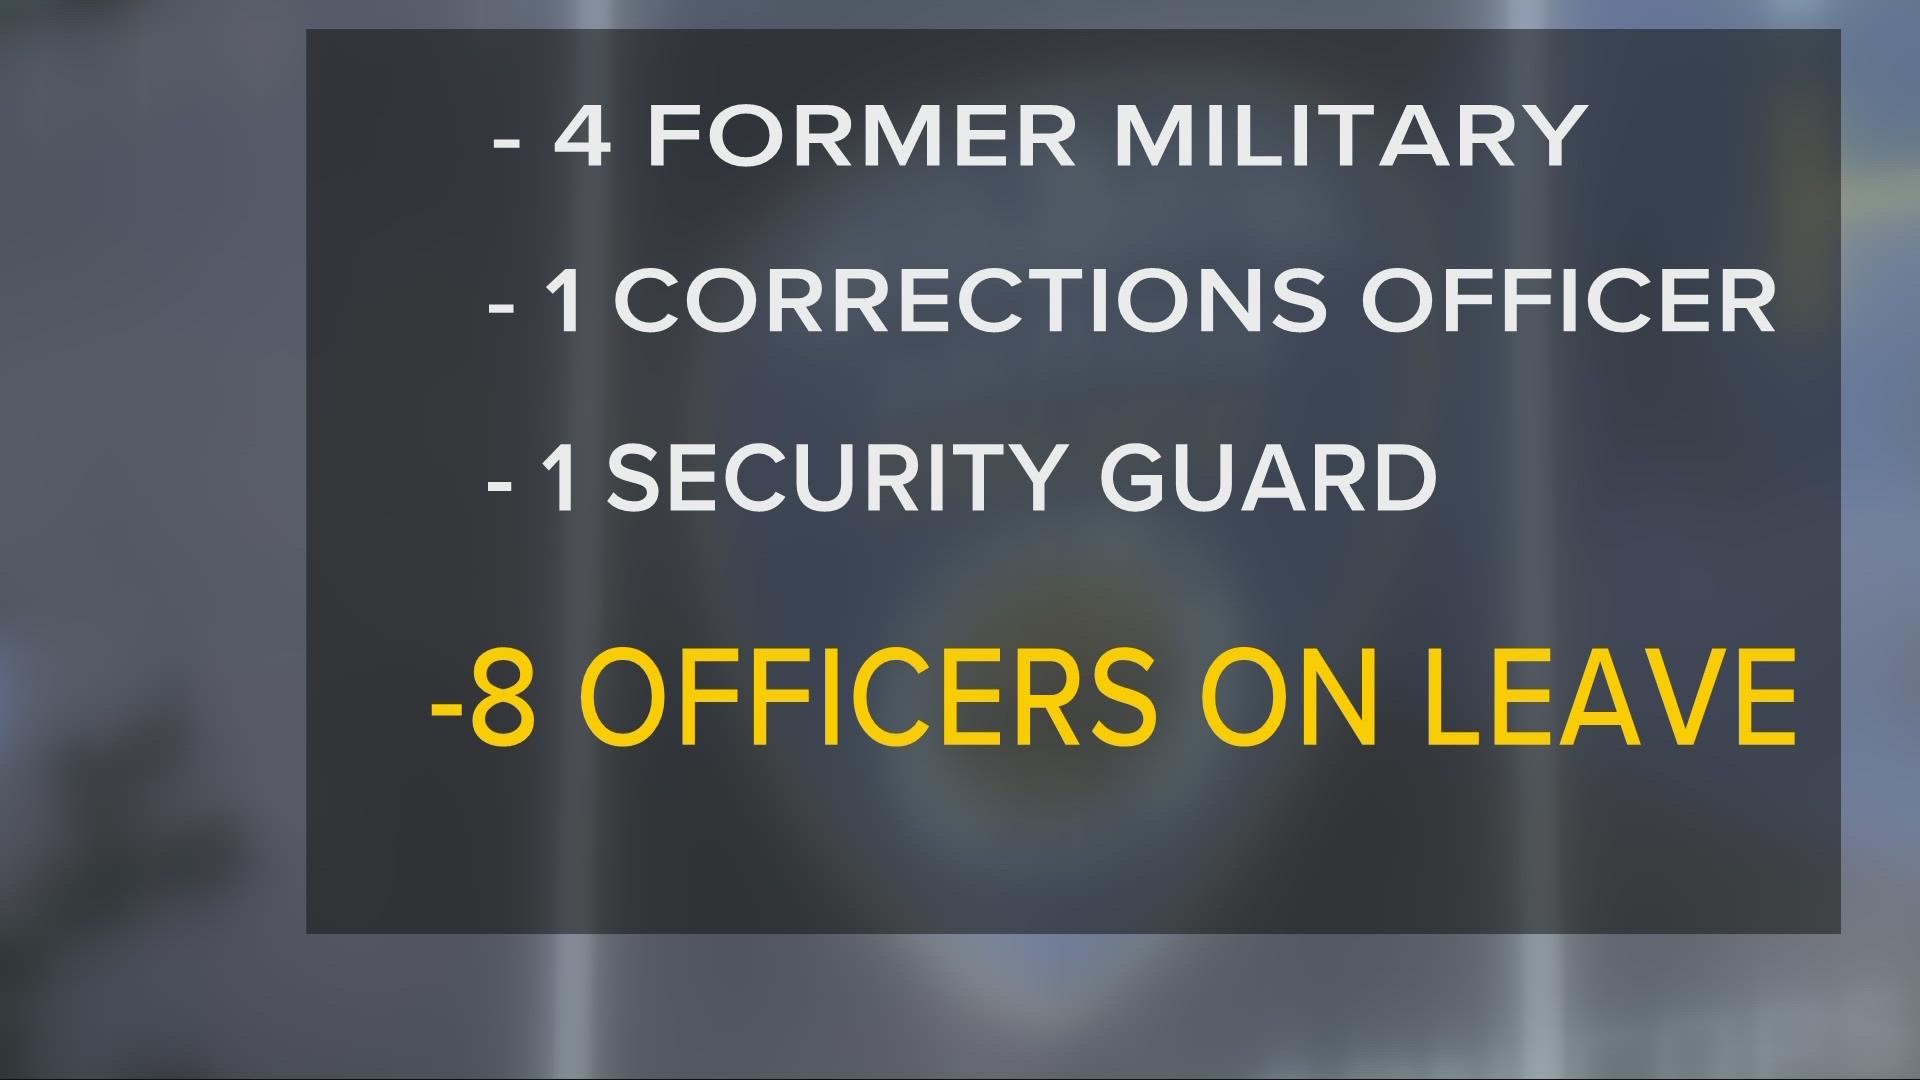 Four of the eight officers have military backgrounds, while three have Bachelor's degrees. None of the eight officers had previously faced work-related discipline.